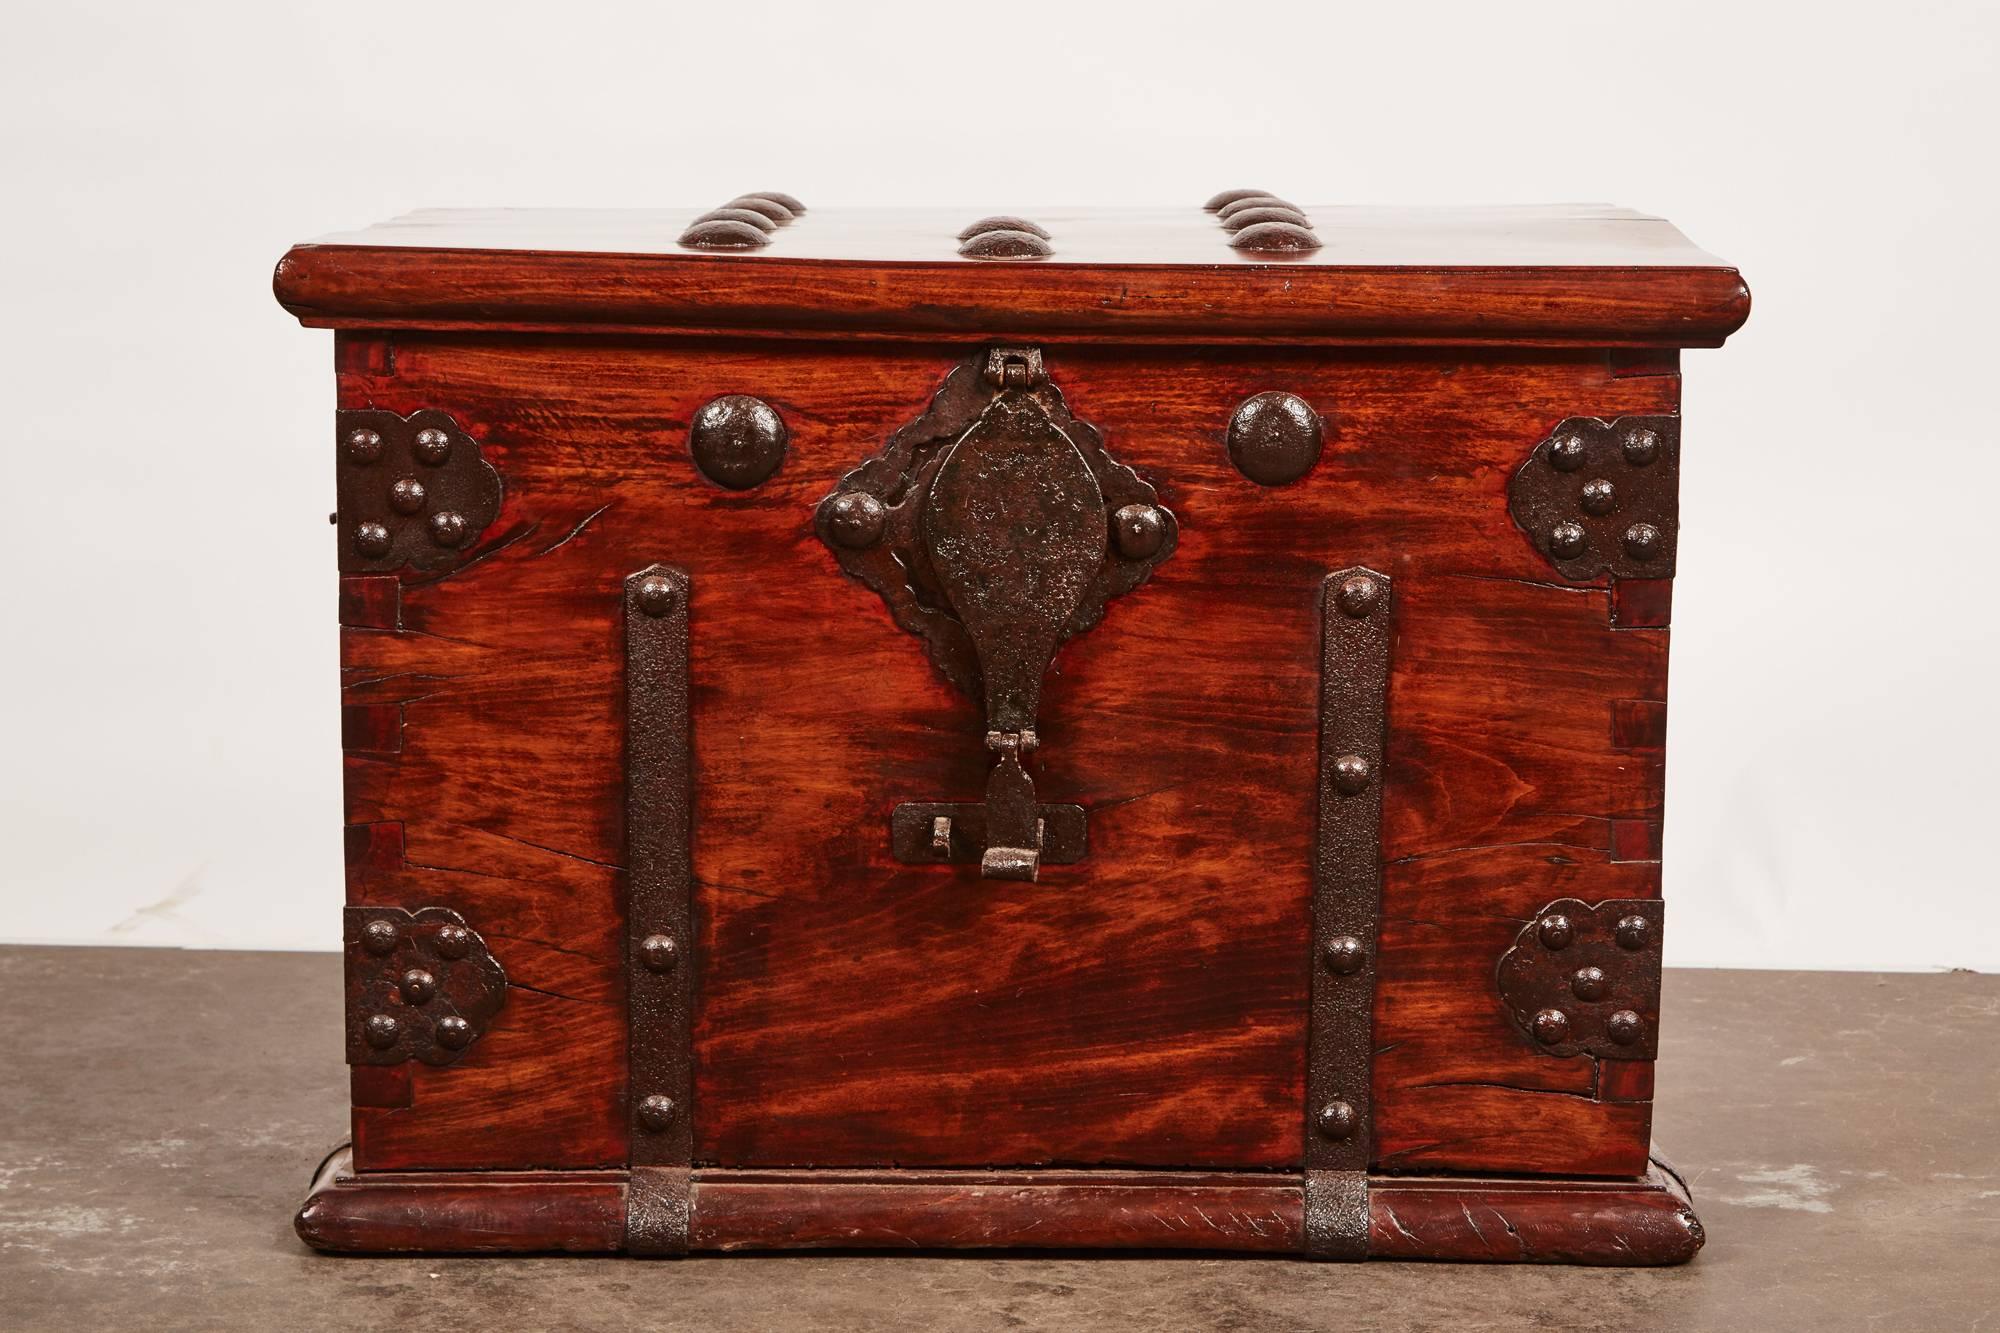 This 19th century Qing dynasty iron bound chest features nailheads and other metalwork throughout the exterior of the chest. Its intricate metal work and design allows the piece to be distinctive to the this Chinese style. Within the box, there is a